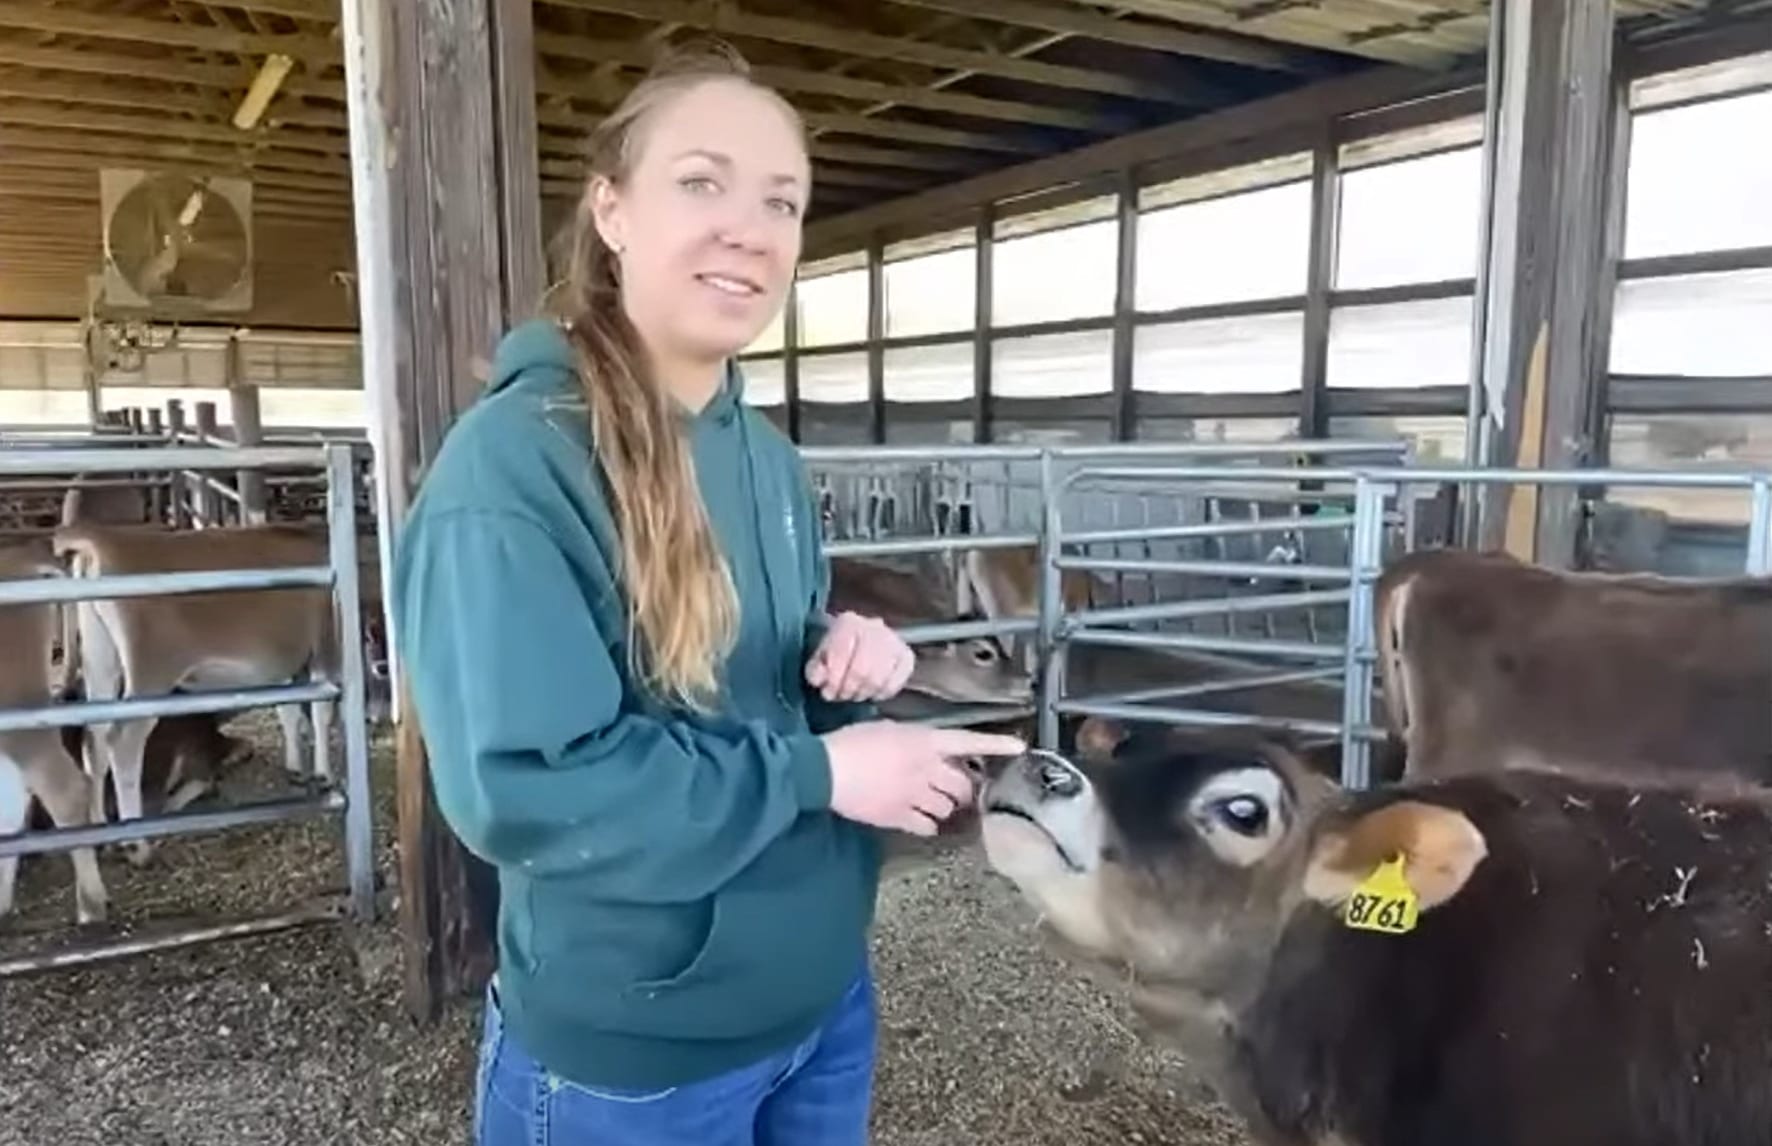 Adopt a Cow Program Continues to Grow Participation